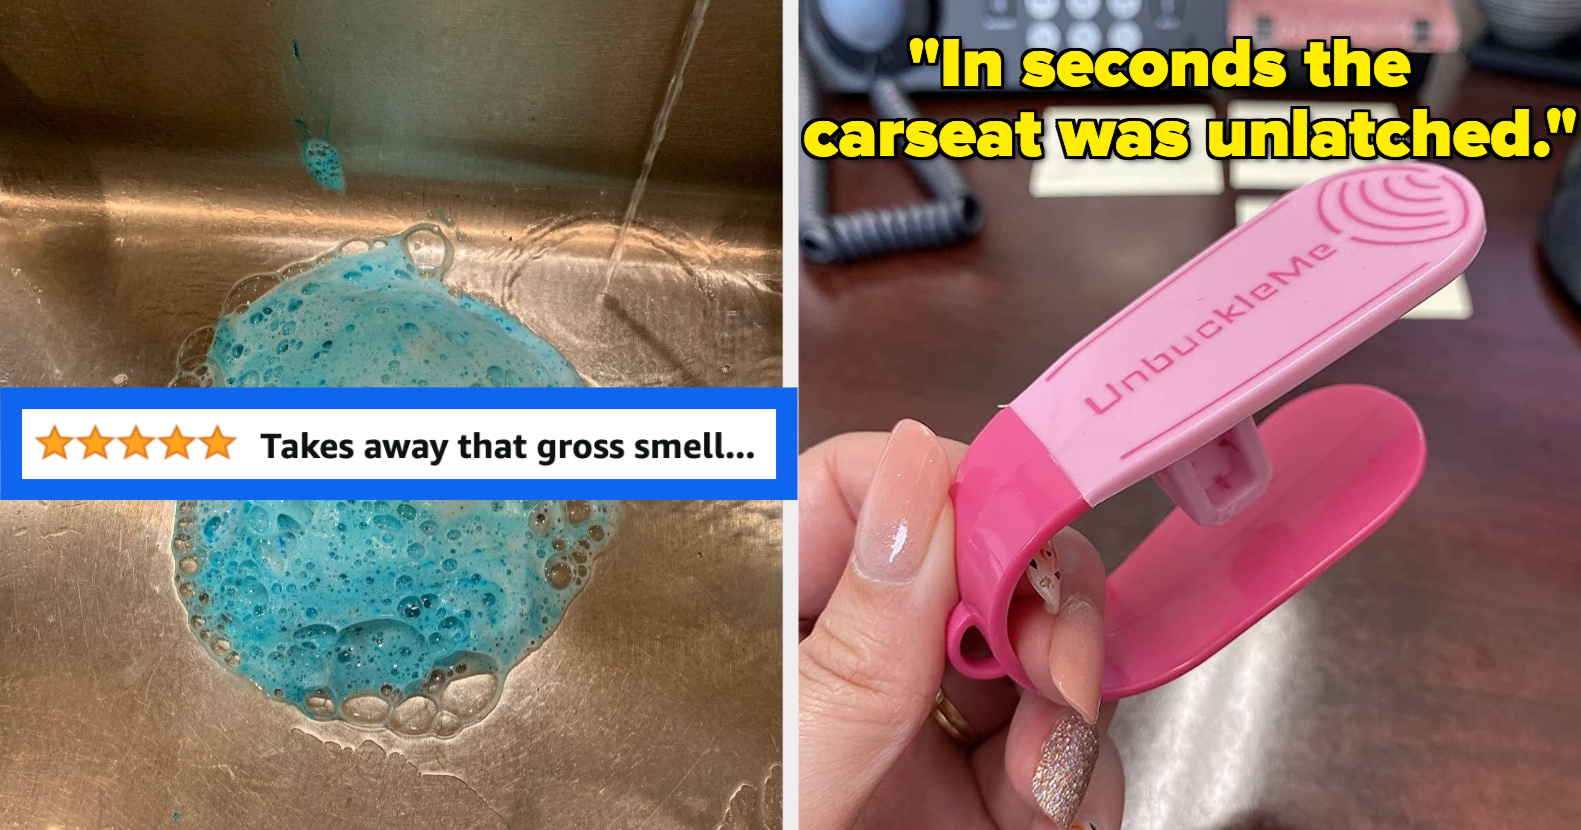 37 Things You Won't Believe You've Survived Without